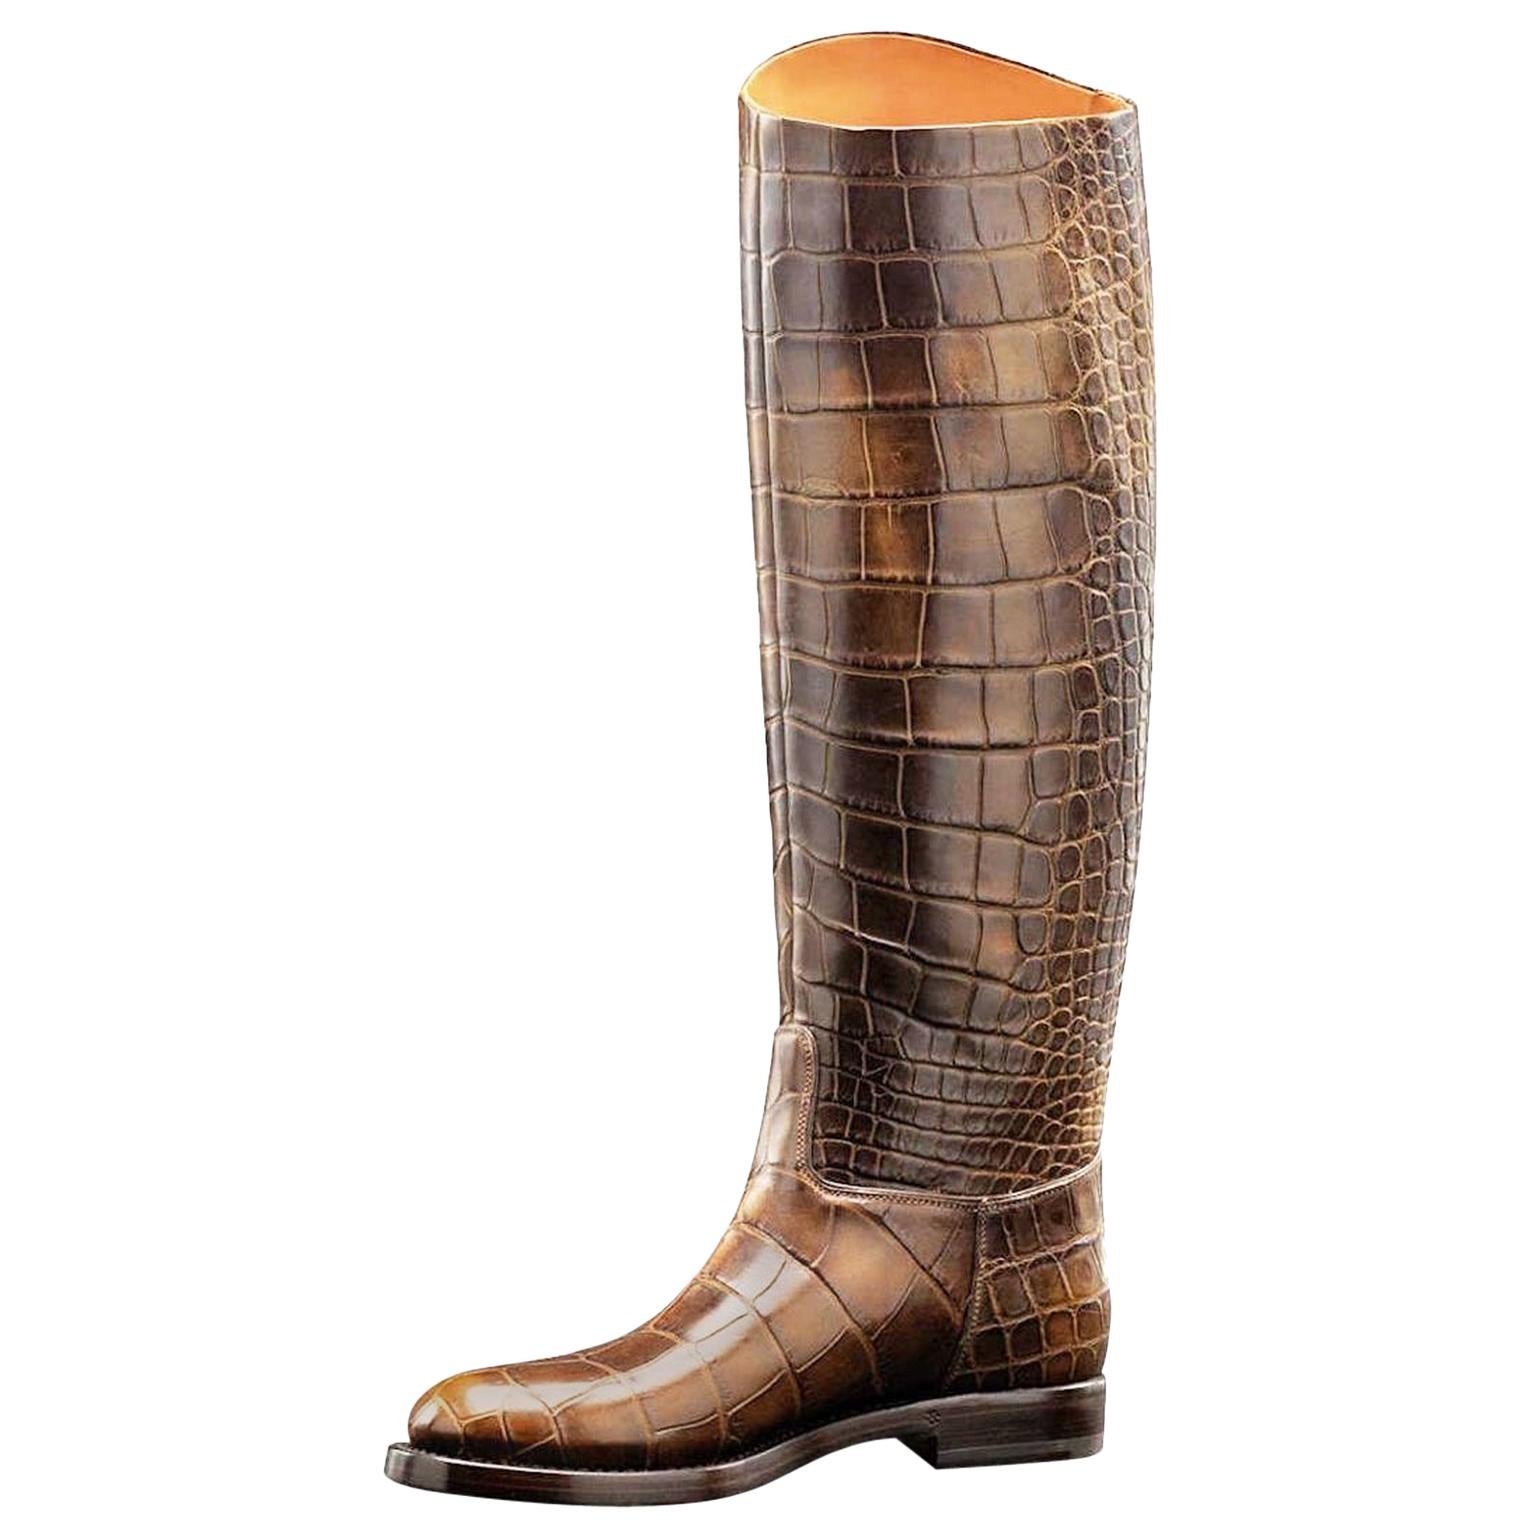 UNWORN Gucci Exotic Crocodile Skin 1921 Collection Crest Riding Style Boots 46.5 For Sale